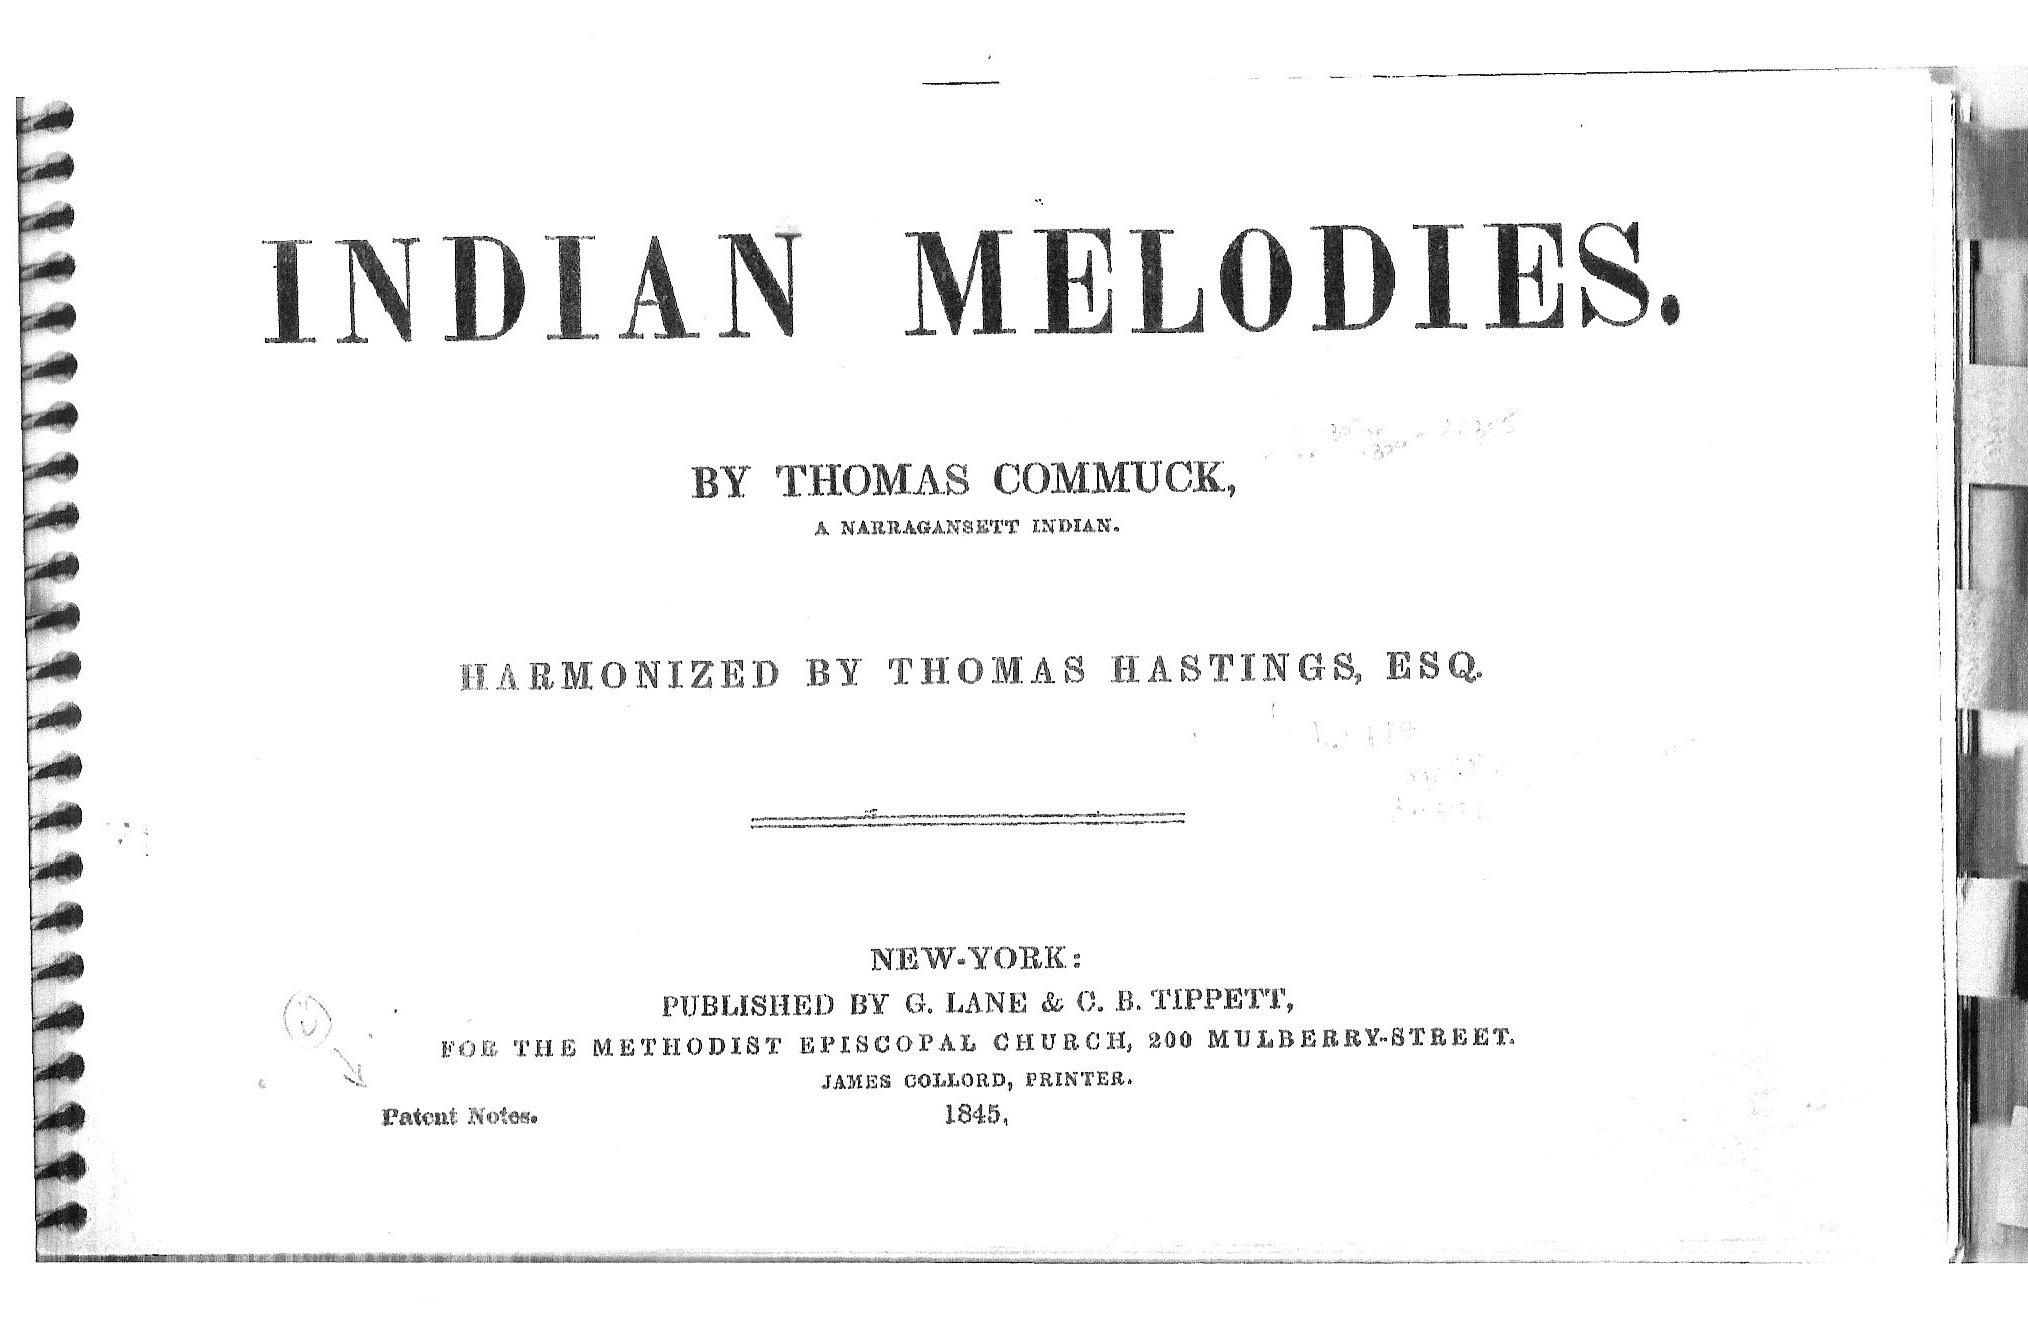 Commuck 1845 title page